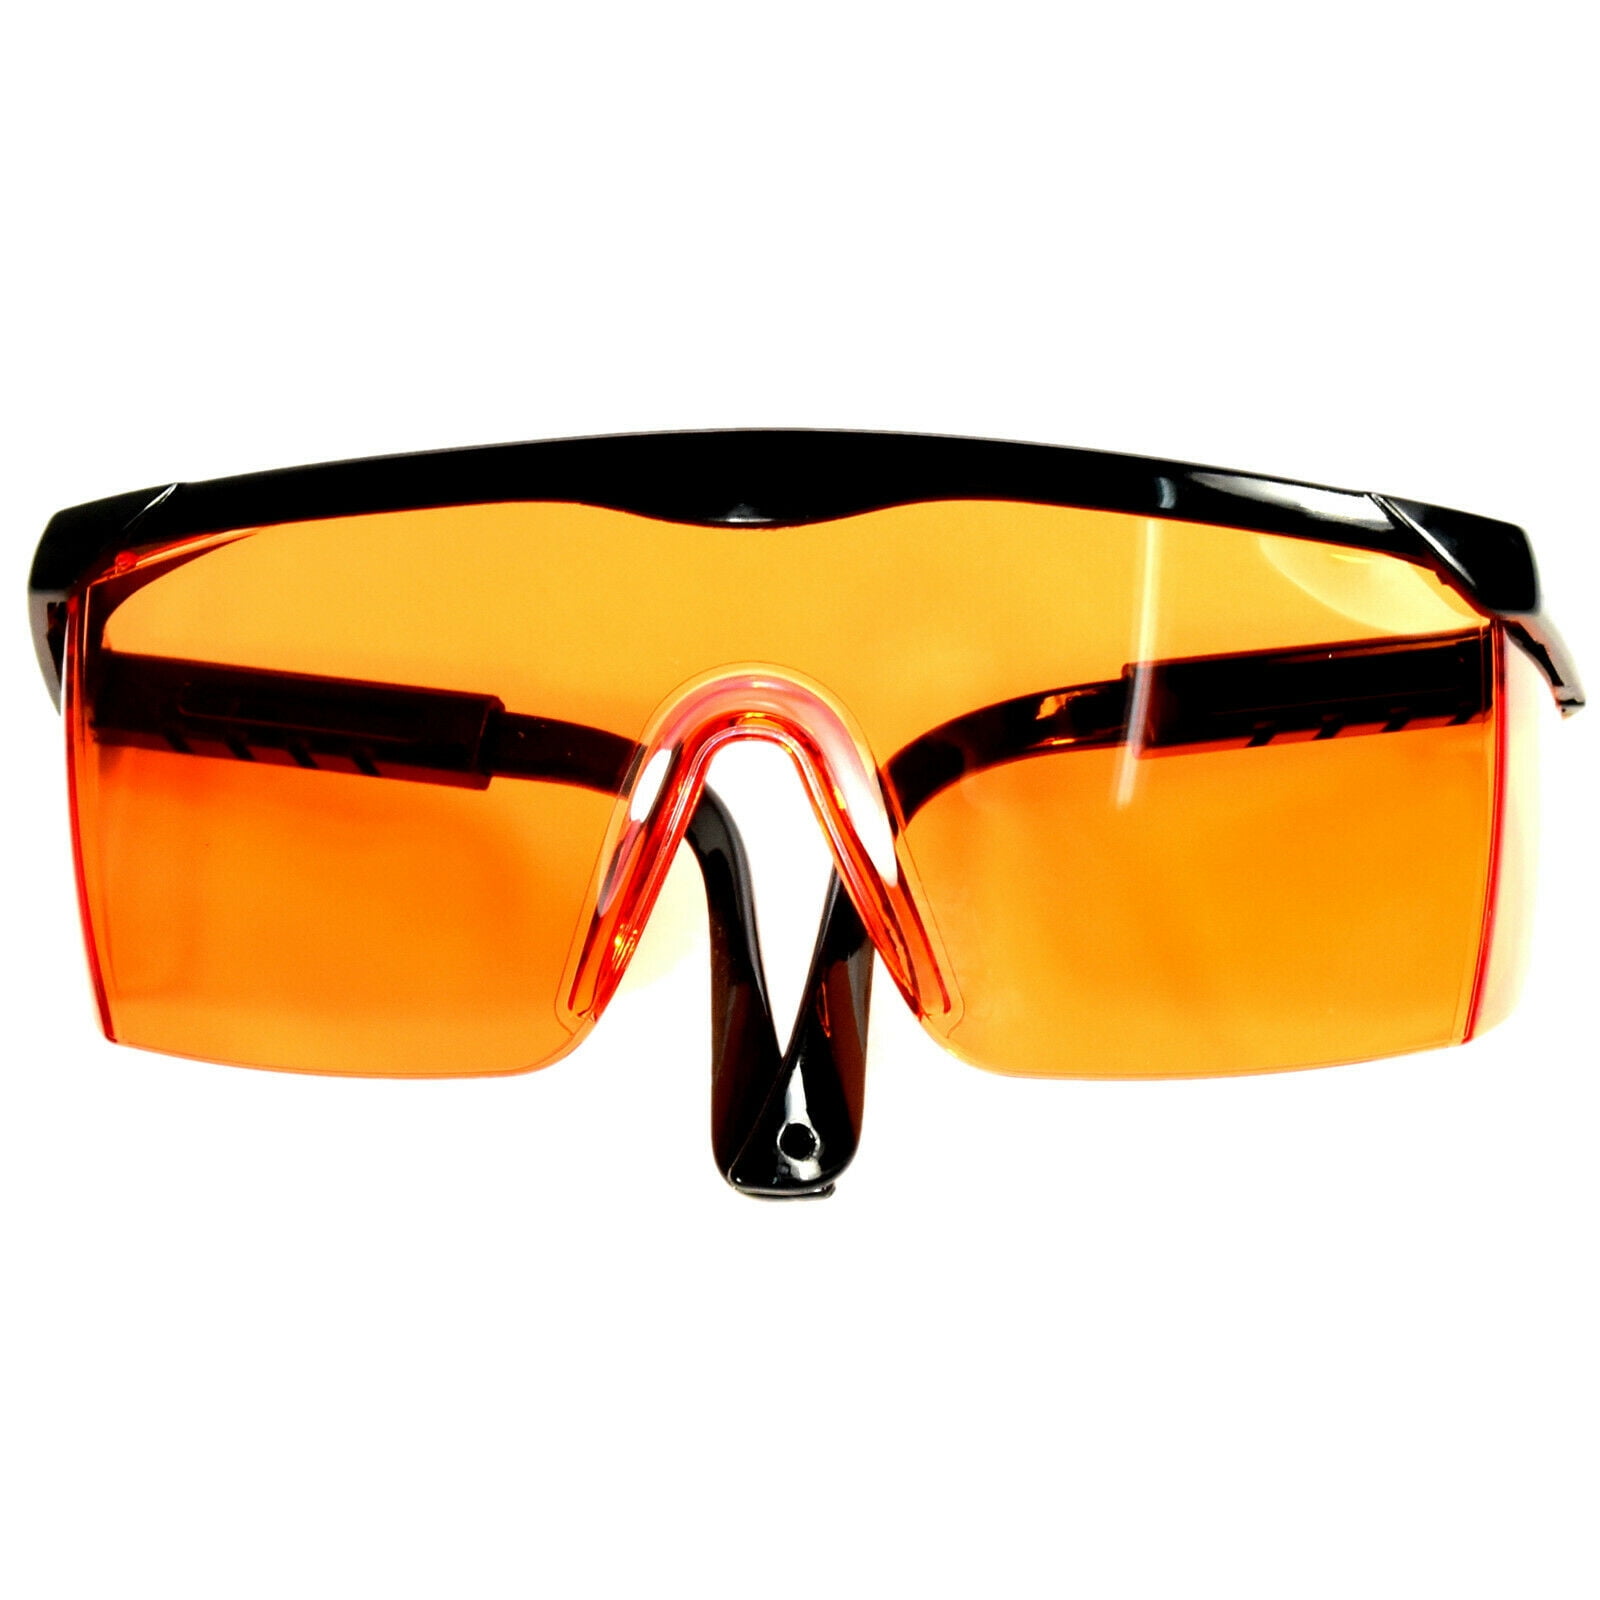 Lightweight Safety Glasses for Shooting Airsoft Orange Tint Protection Eyewear 